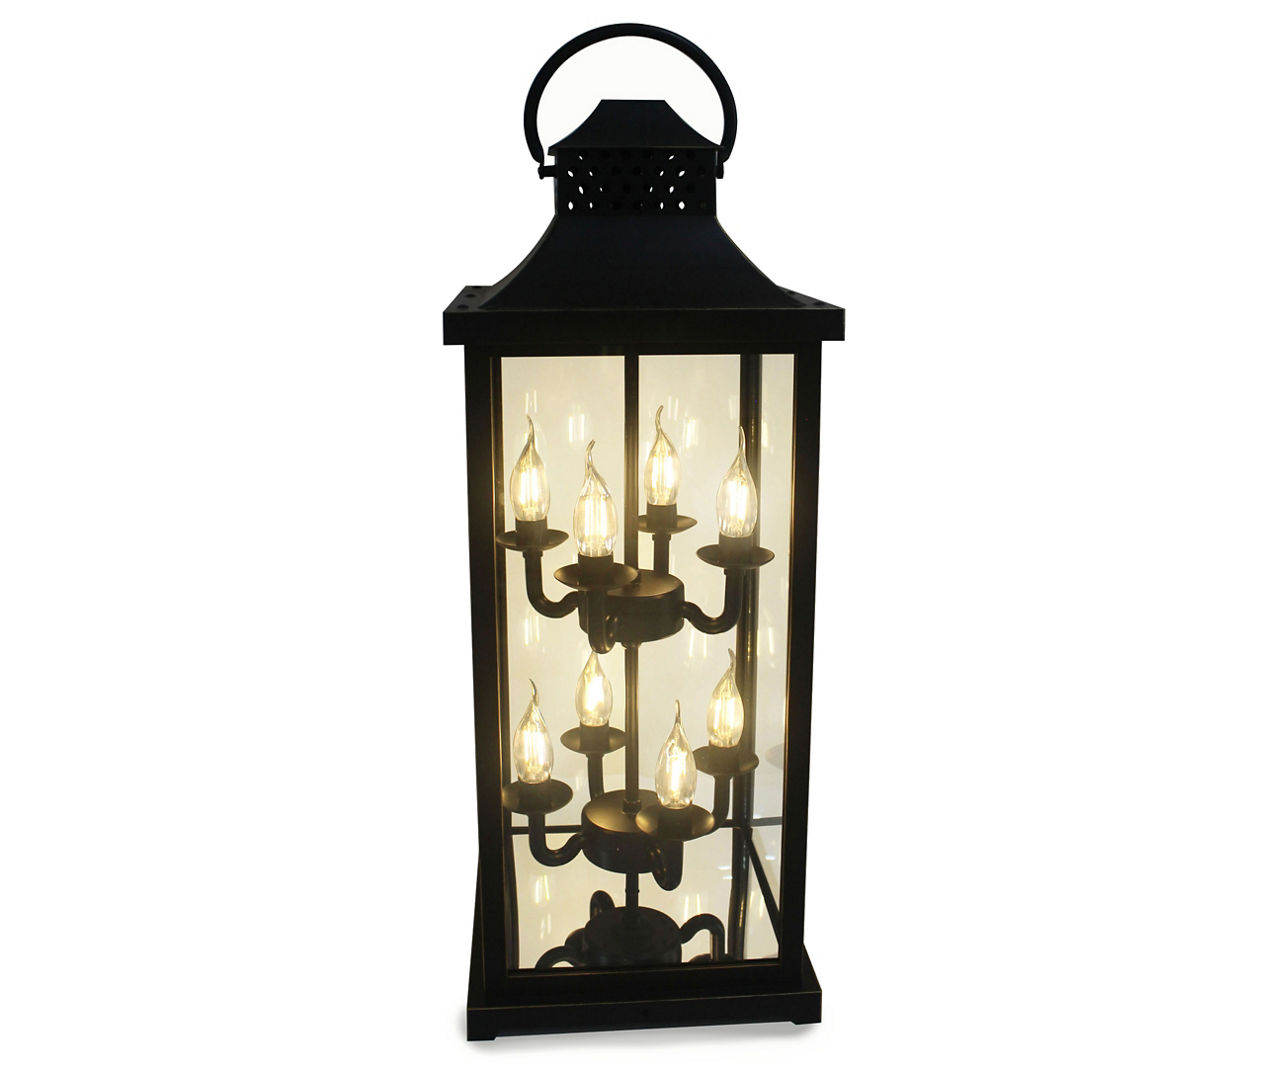 schipper video Compliment Broyhill 30" LED Candle Floor Lantern | Big Lots